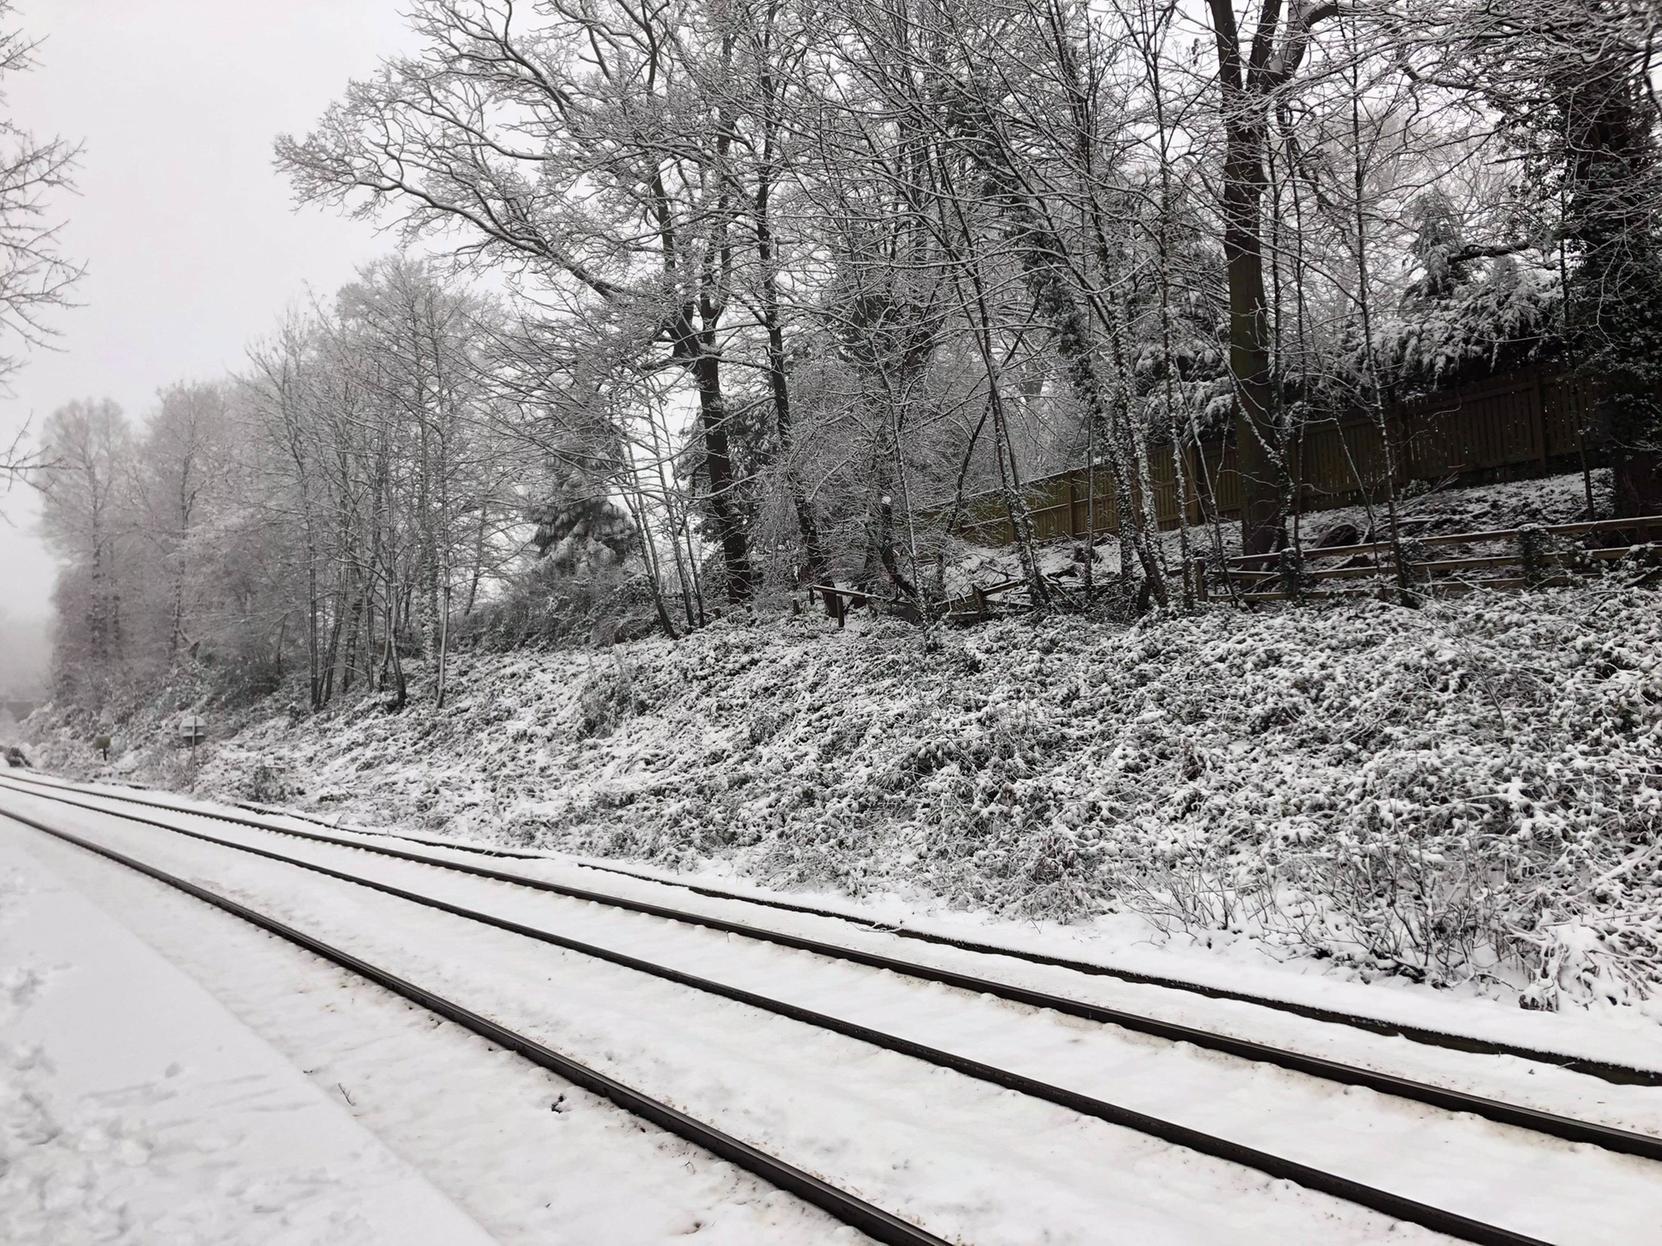 Snow along the train tracks in Harrogate this morning.